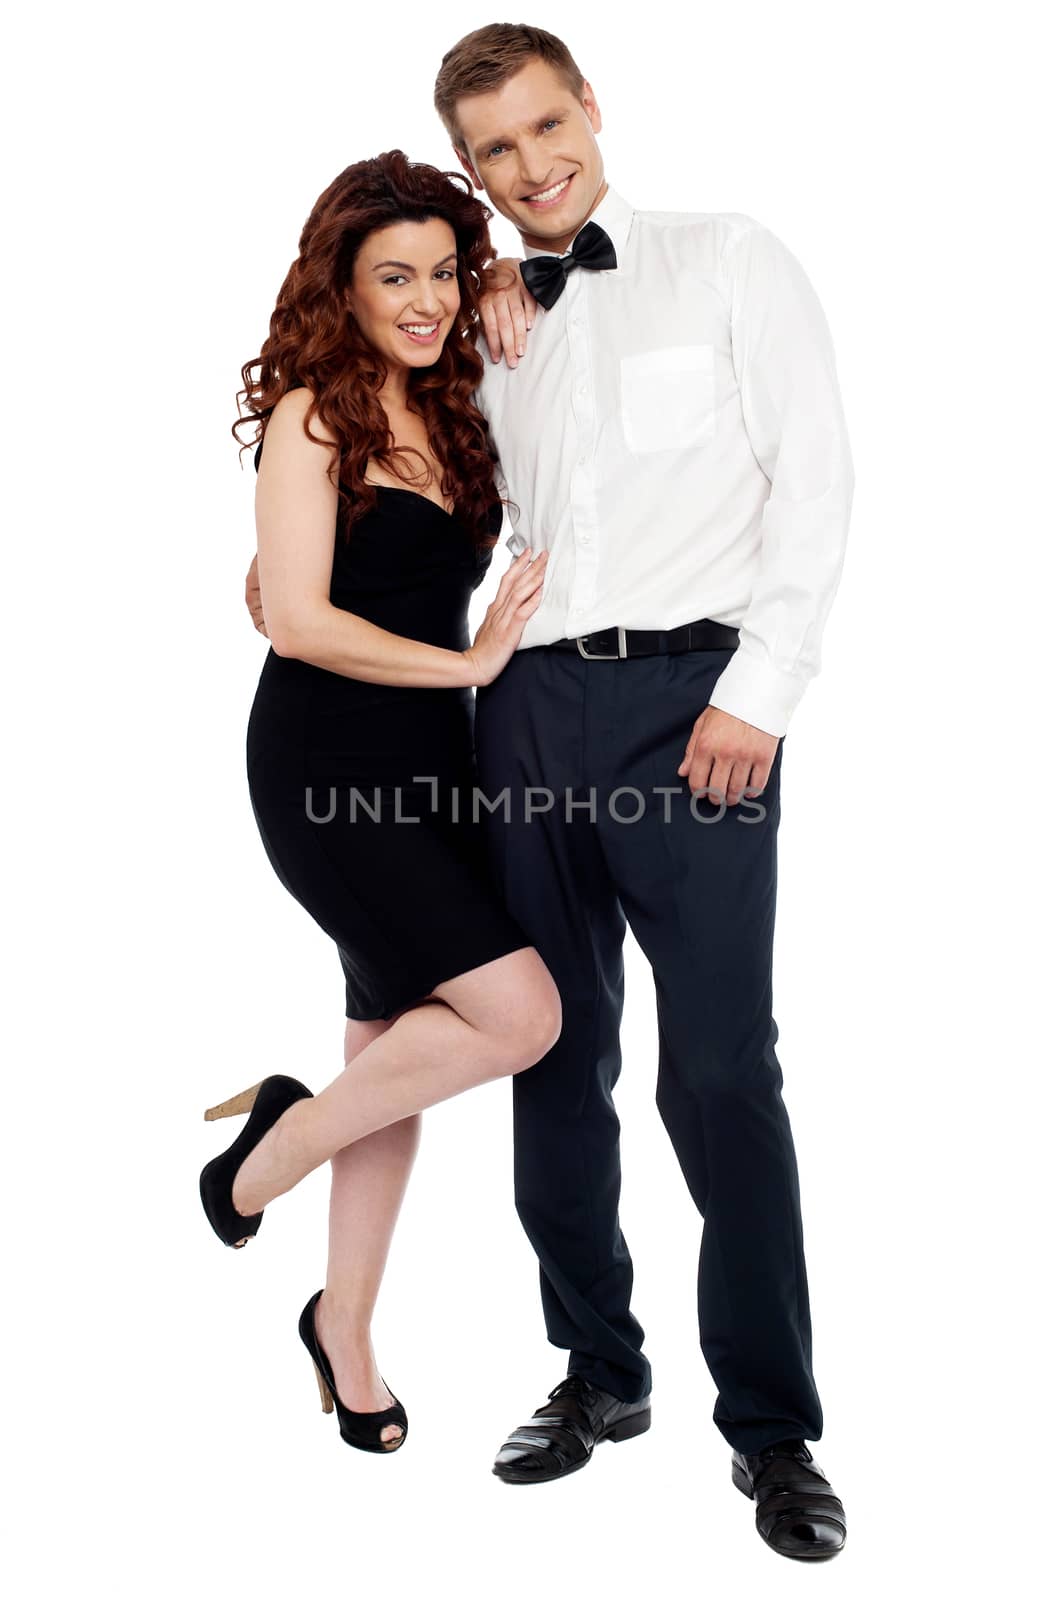 Full length portrait of attractive couple dressed in party wear attire. Isolated against white